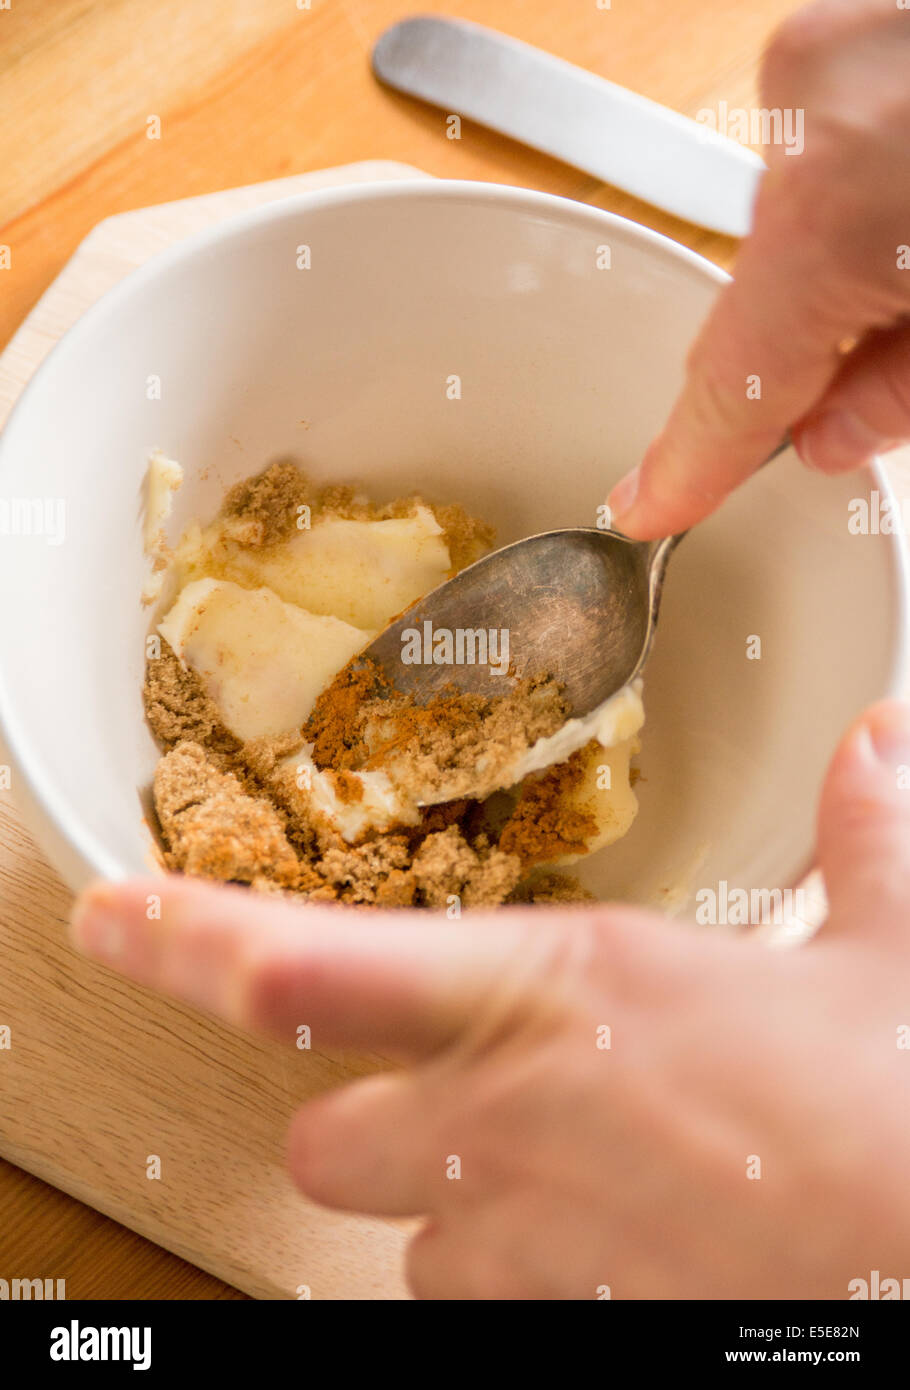 Step by step how to make Cinnamon Toast Stock Photo